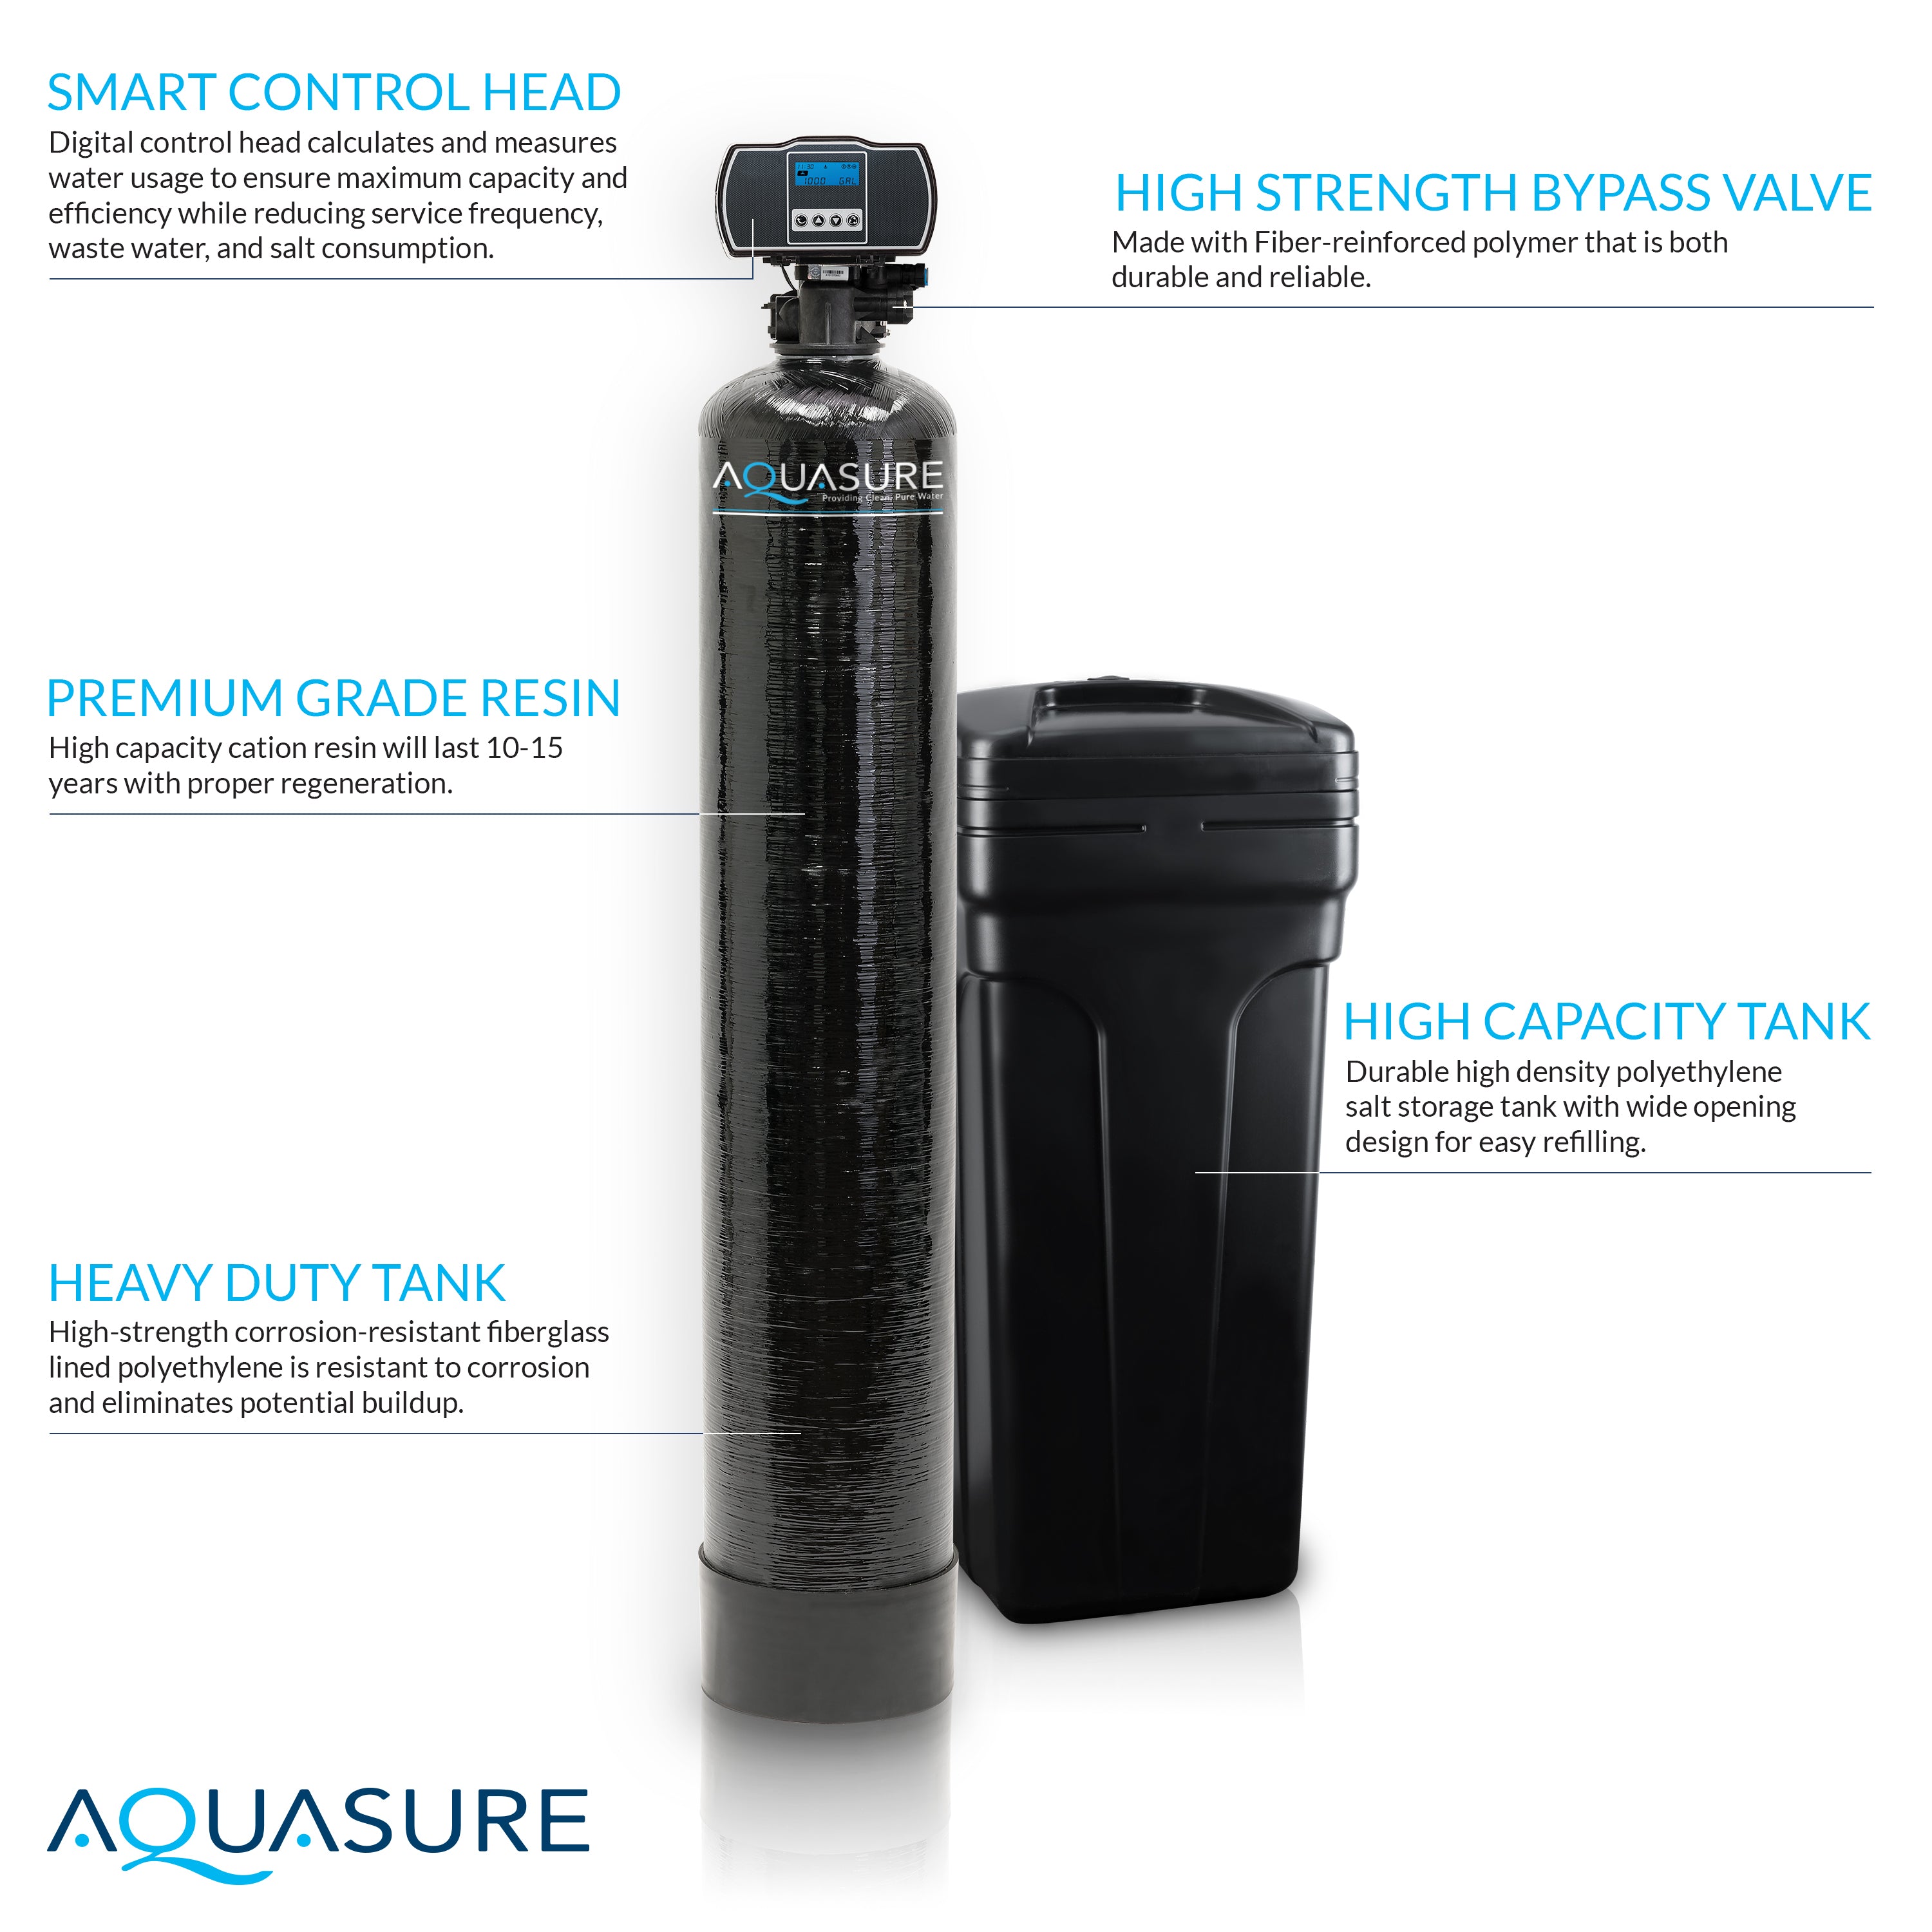 Signature Elite | 1,500,000 Gallons Whole House Water Filter Treatment Bundle with 64,000 Grains Softener, 75 GPD Reverse Osmosis System